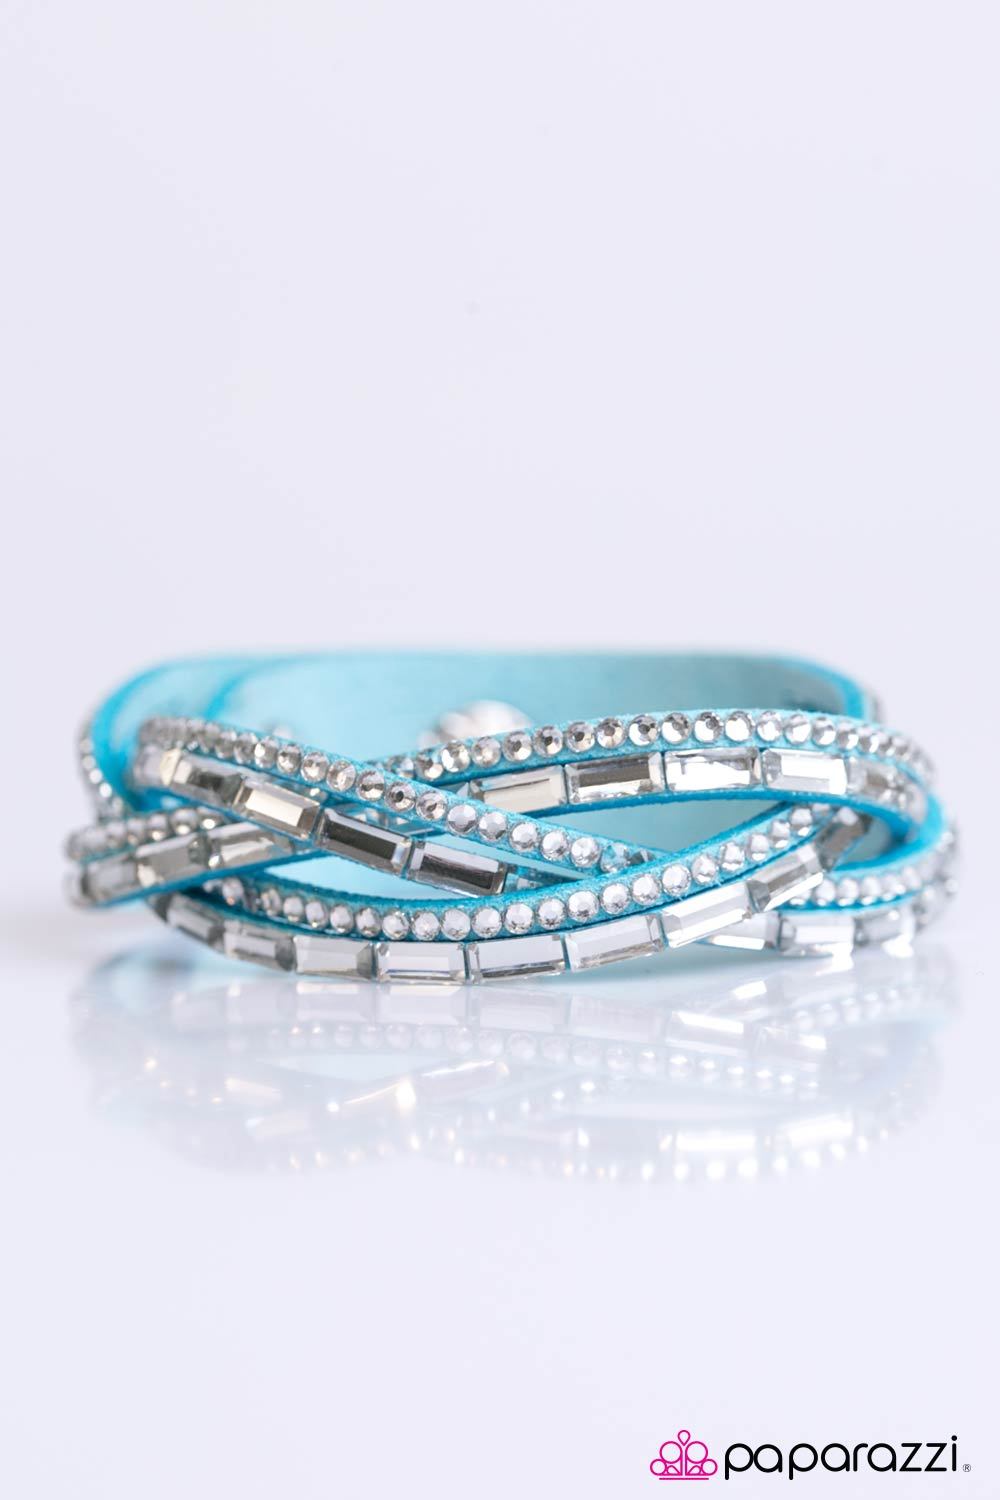 Too Cool for School Blue and White Braided Urban Wrap Snap Bracelet - Paparazzi Accessories-CarasShop.com - $5 Jewelry by Cara Jewels